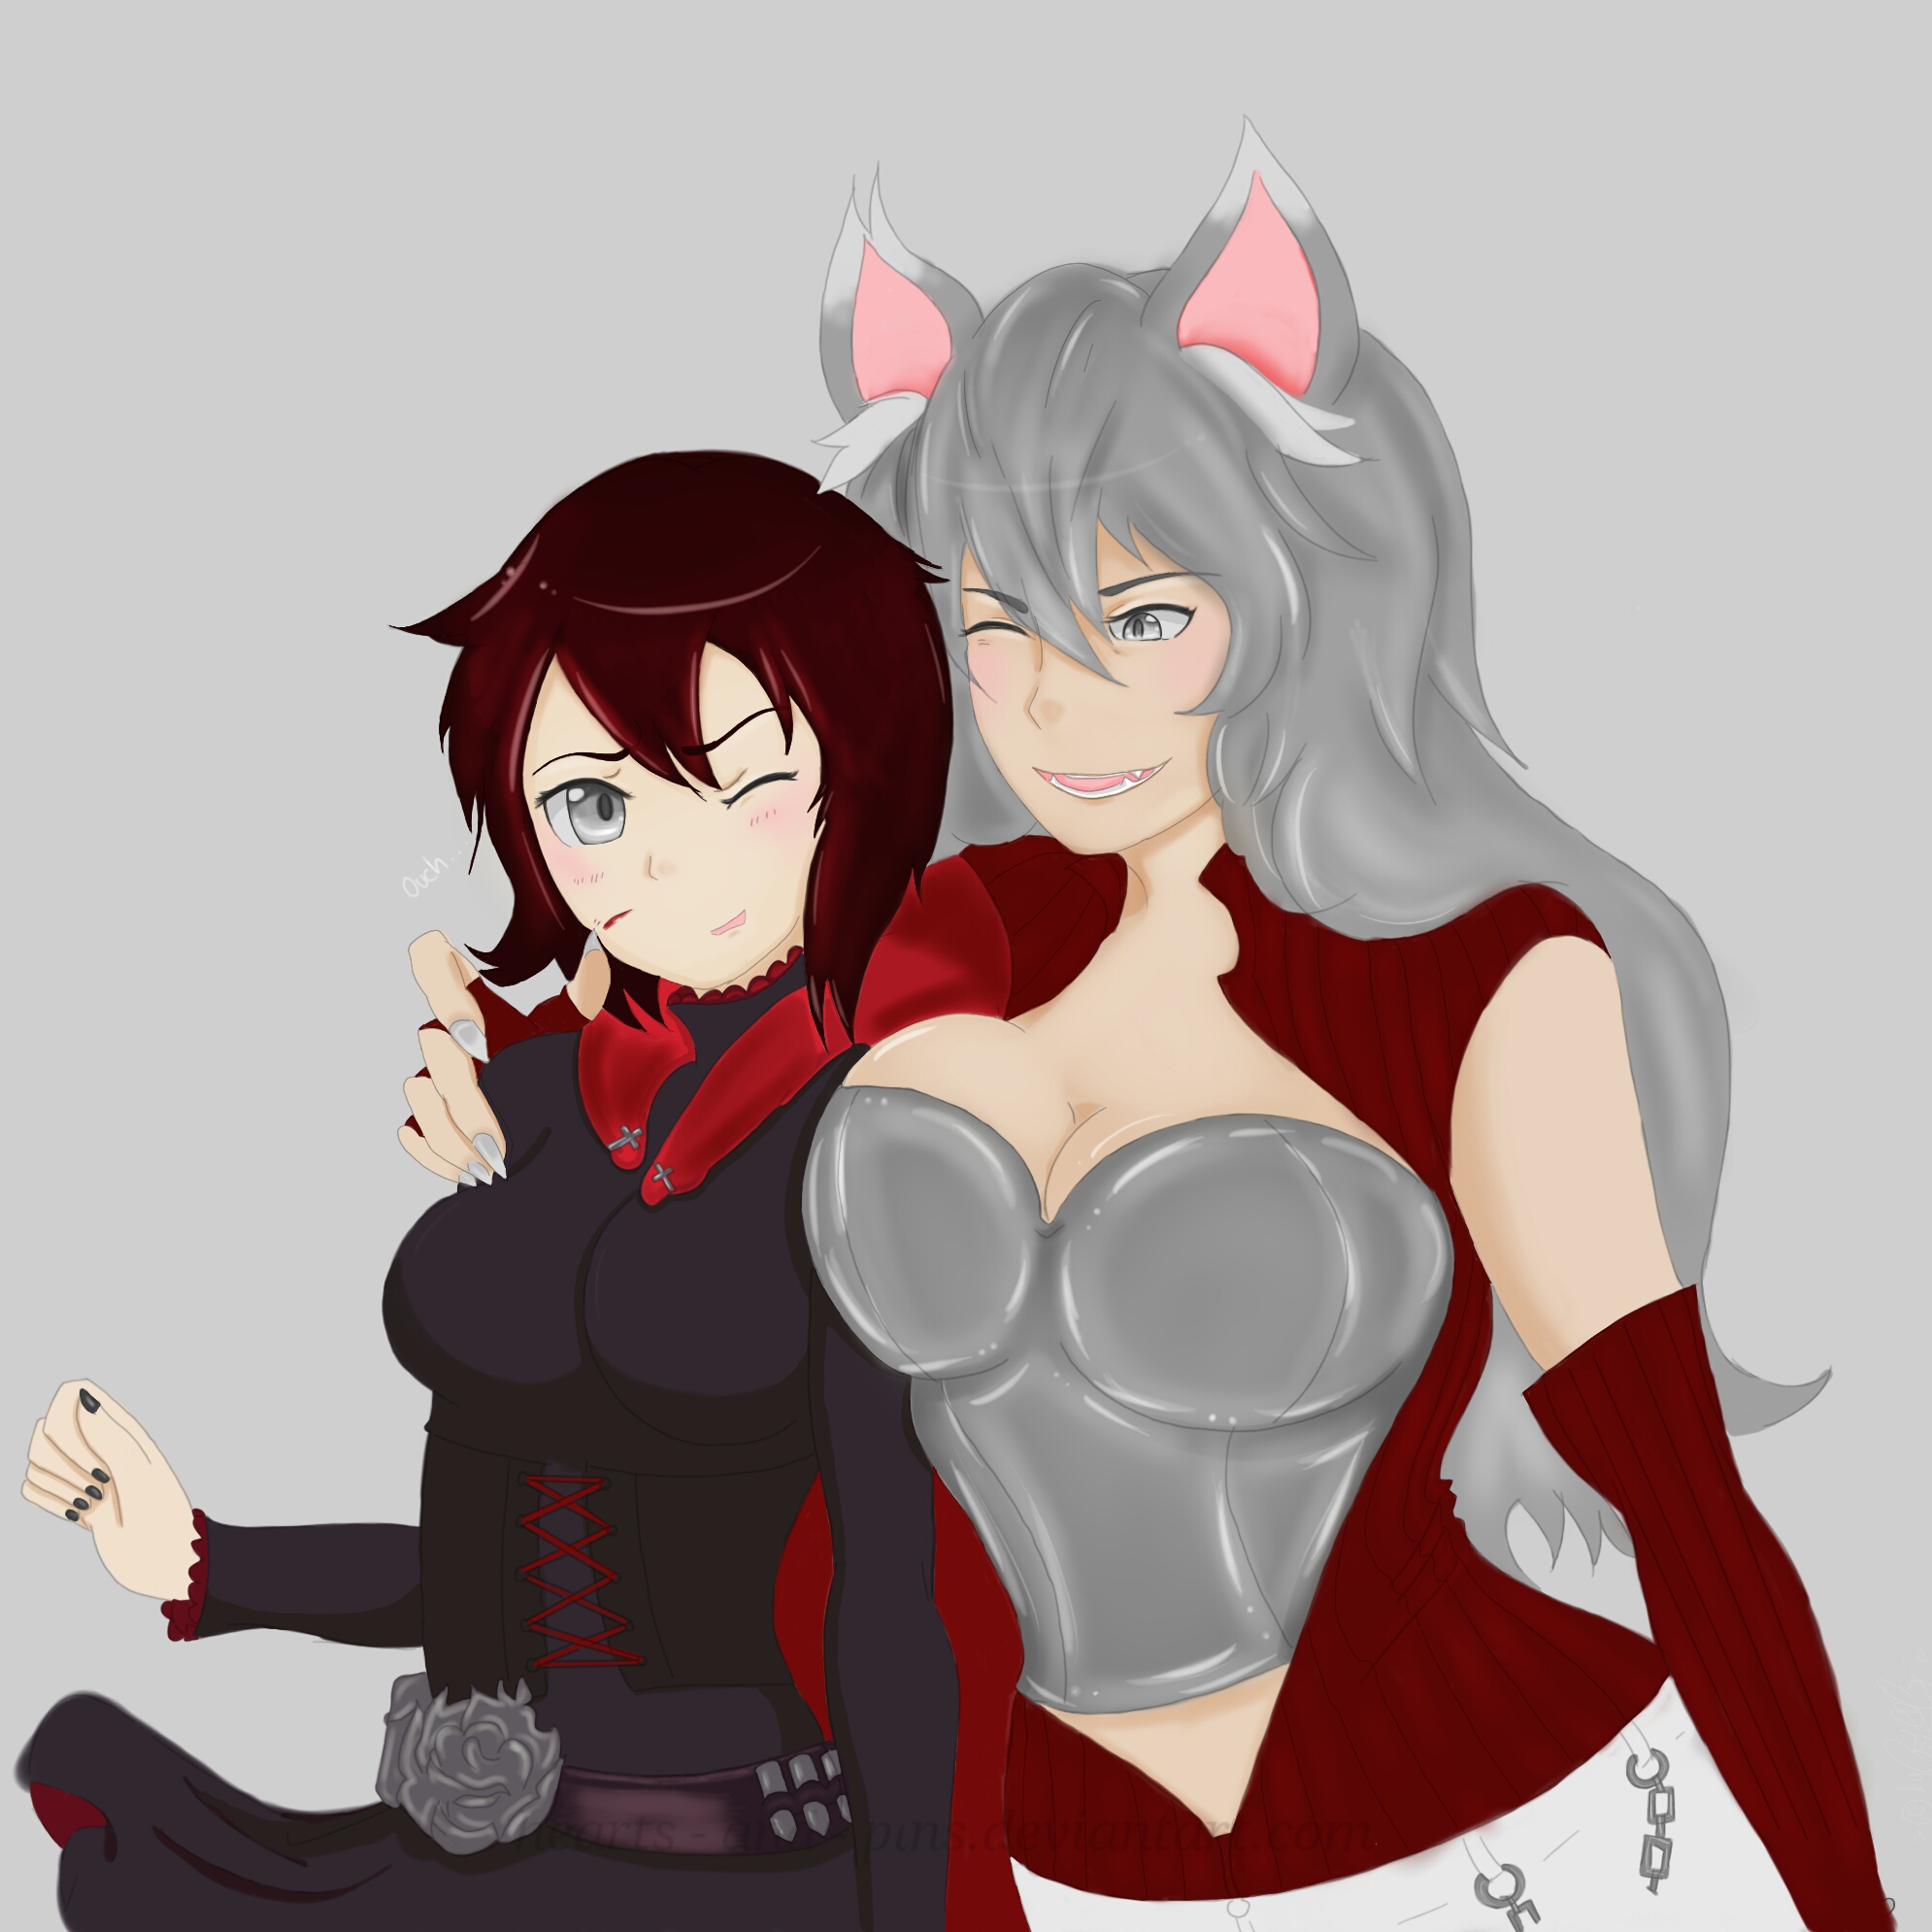 Rwby fanfiction america in remnant.